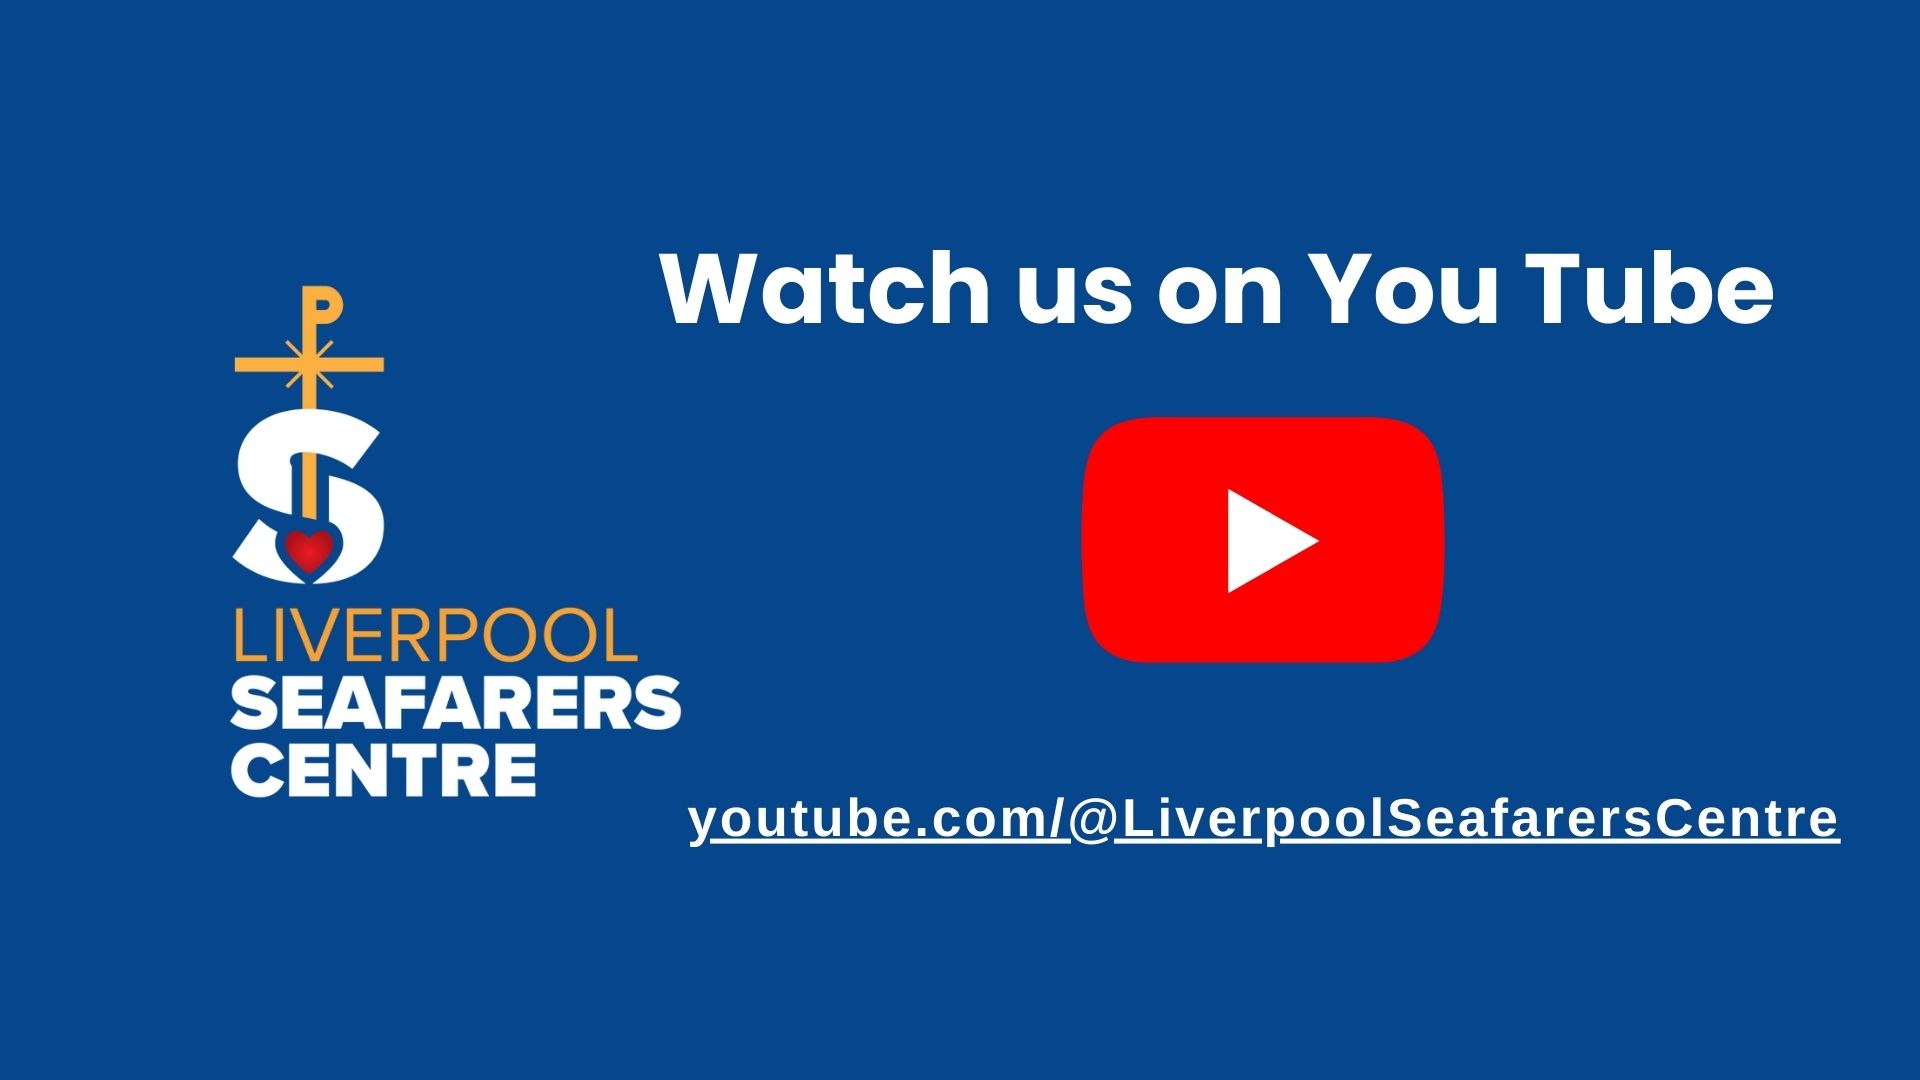 Liverpool Seafarers Centre You Tube Channel